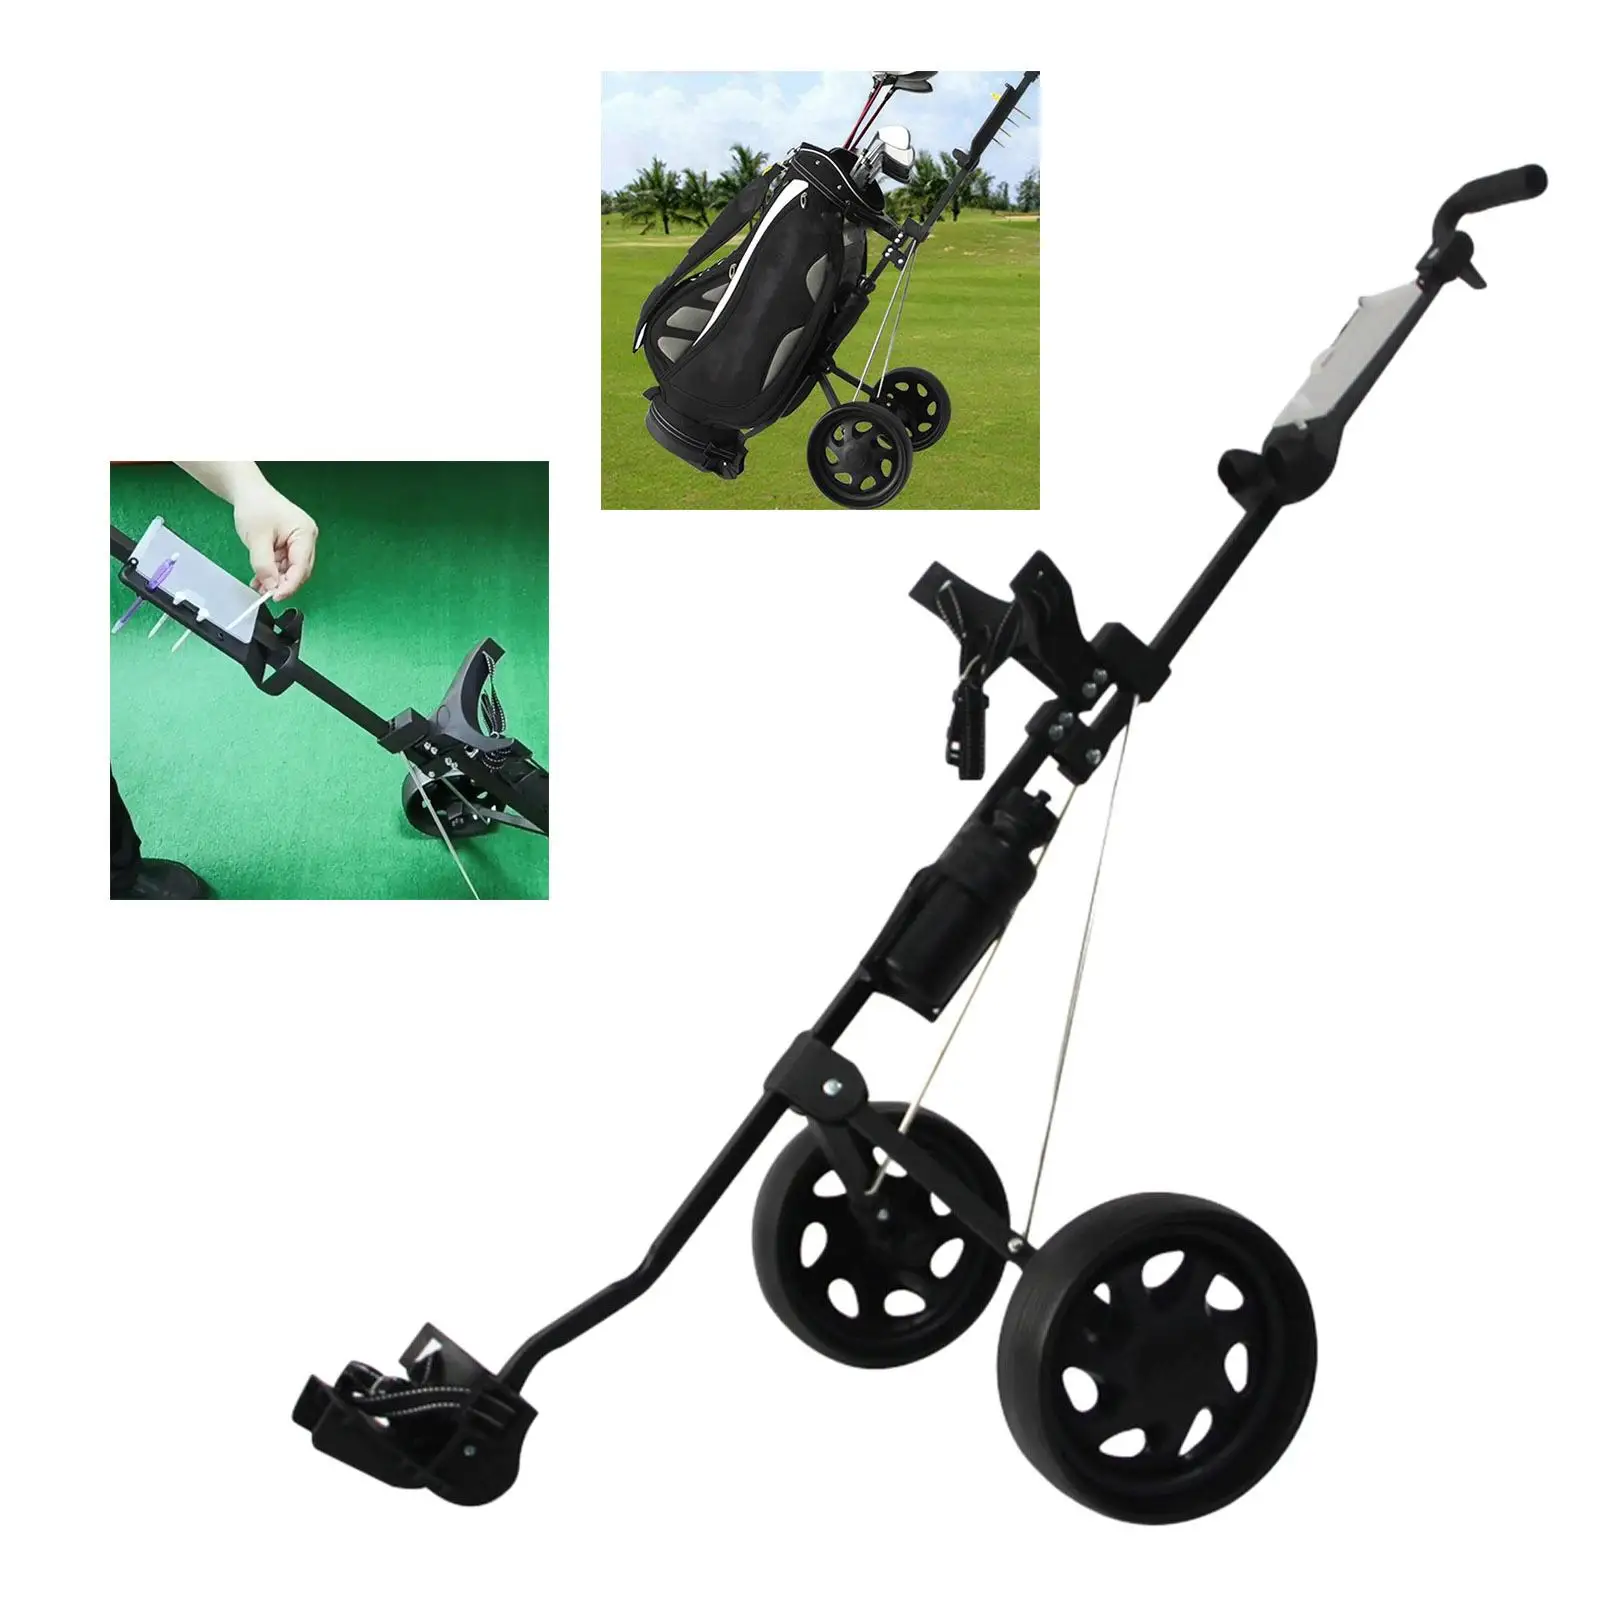 2 Golf Push Pull Cart Collapsible Golf Trolley Carry Holder Accessories